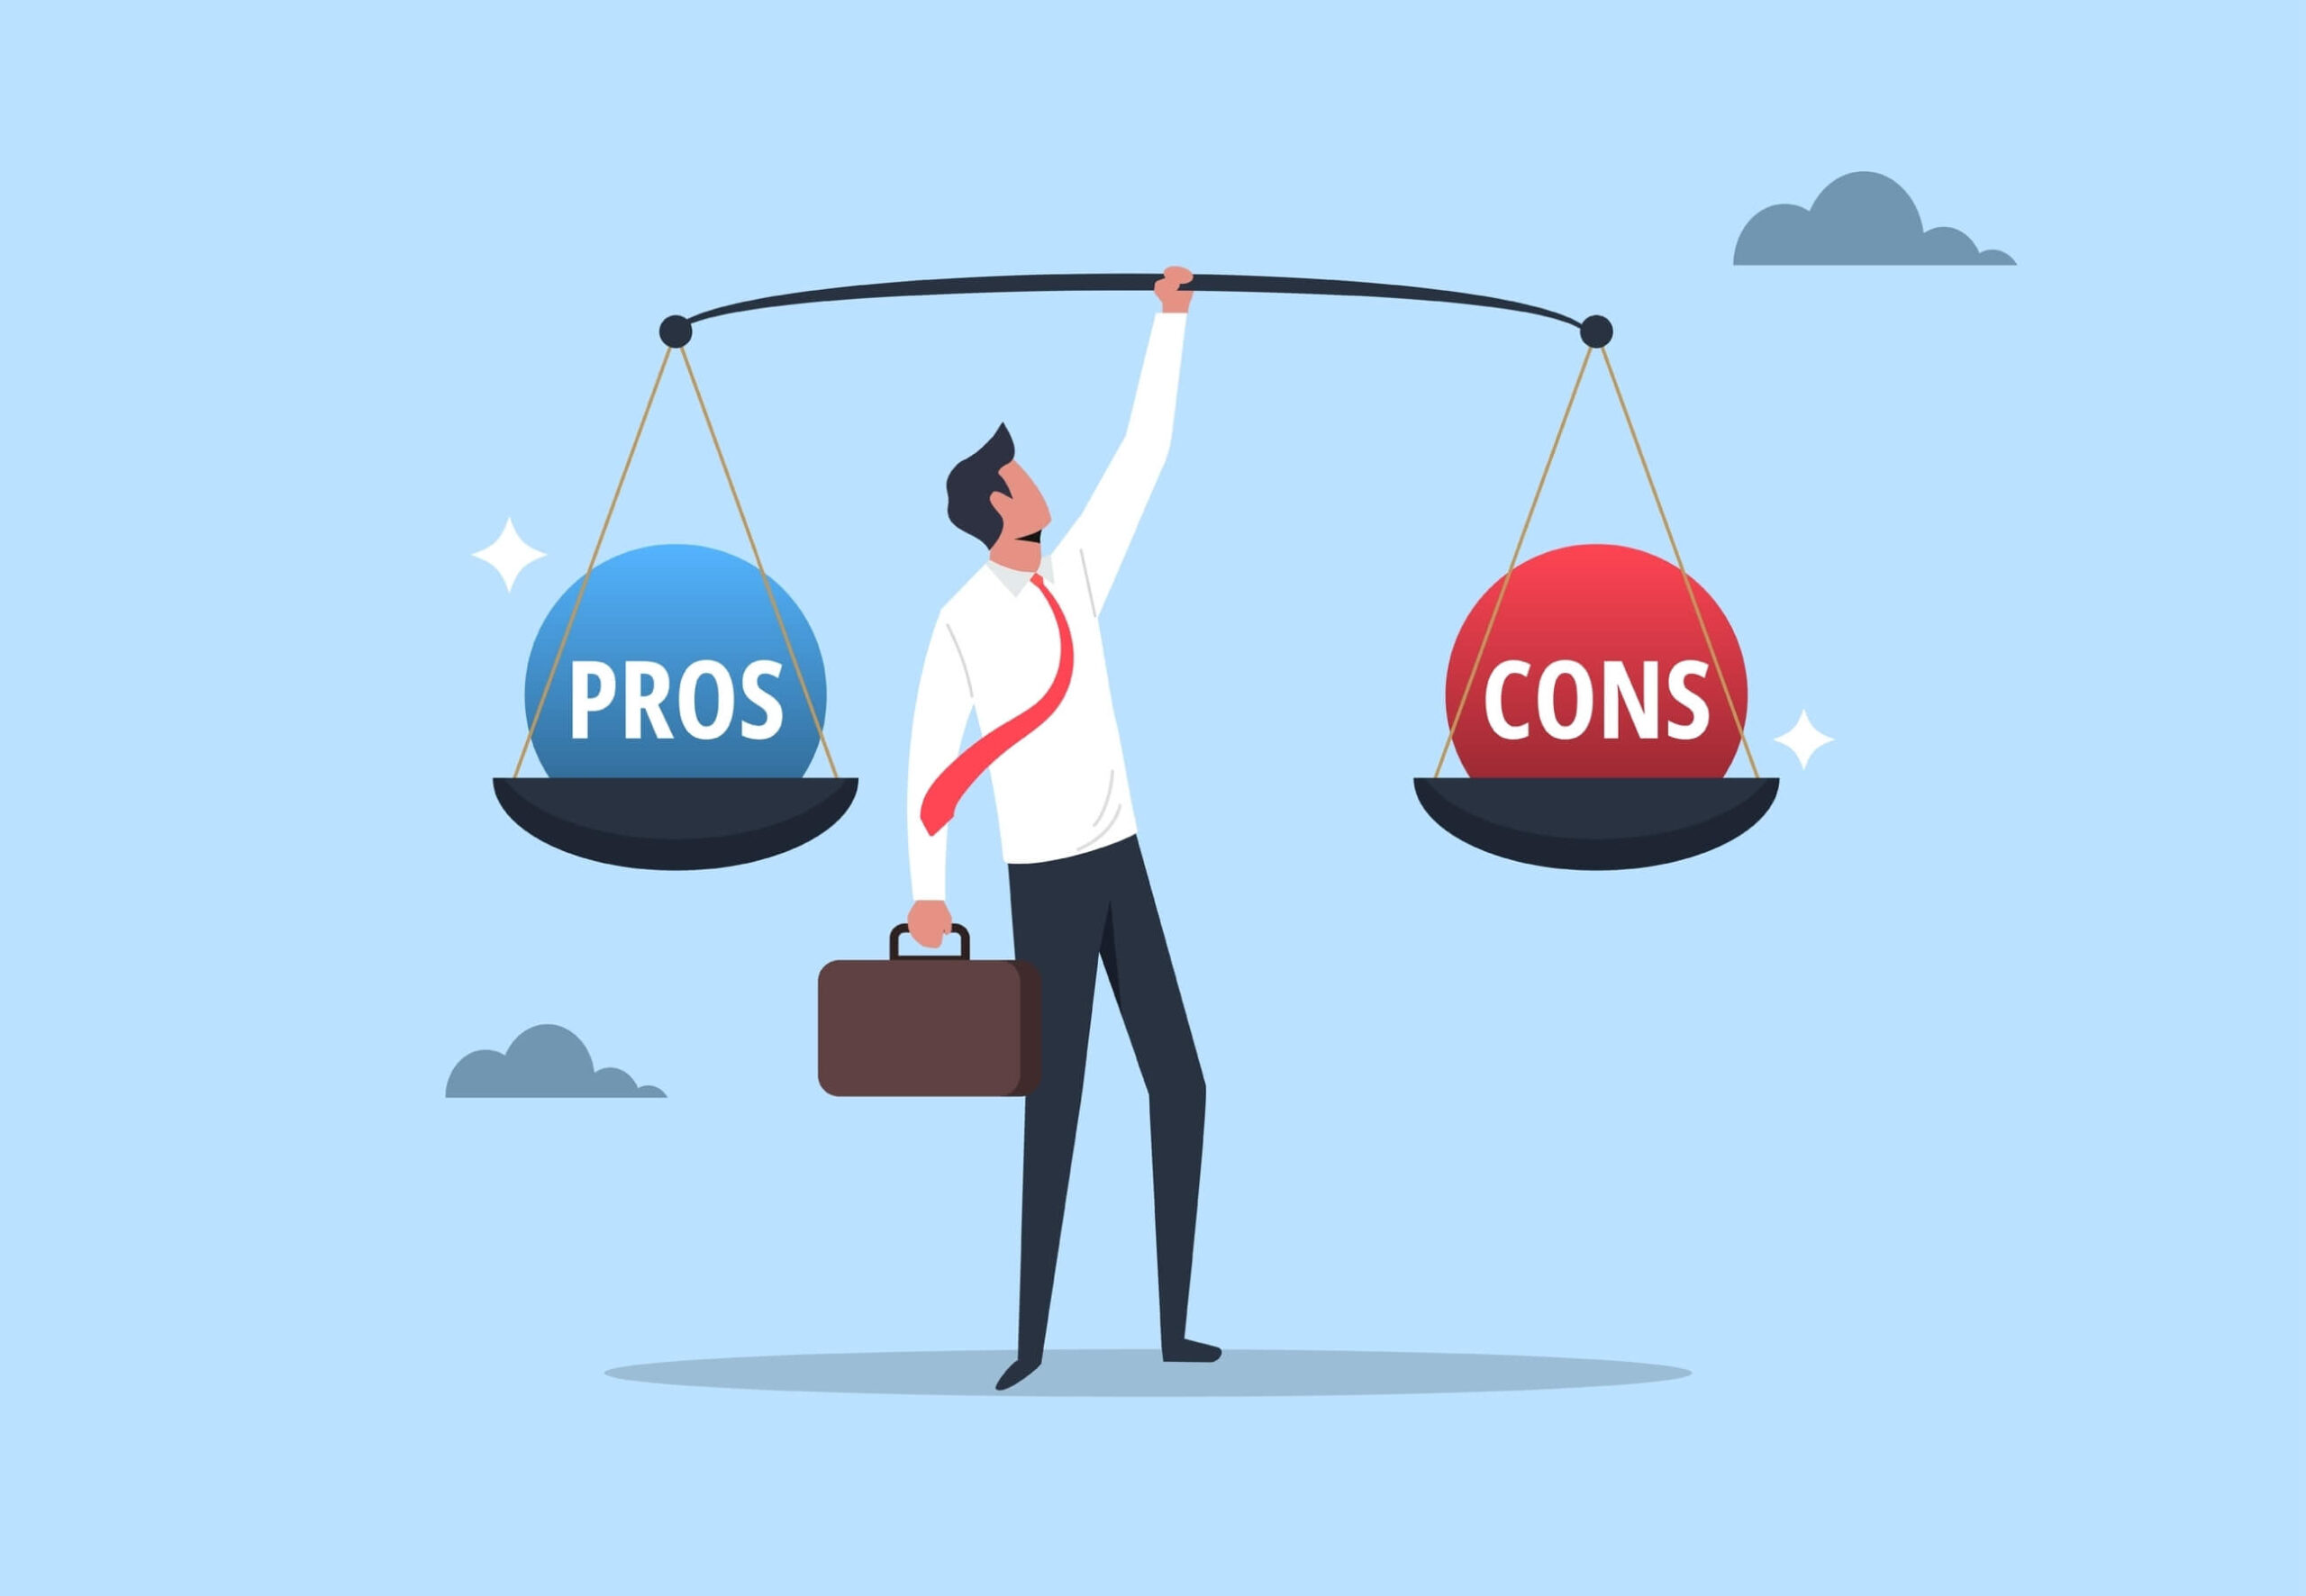 A cartoon image of a businessman holding a scale and on the left side of the scale there is a blue ball that says pros and on the right side of the scale there is a red ball that says cons and the scale is even